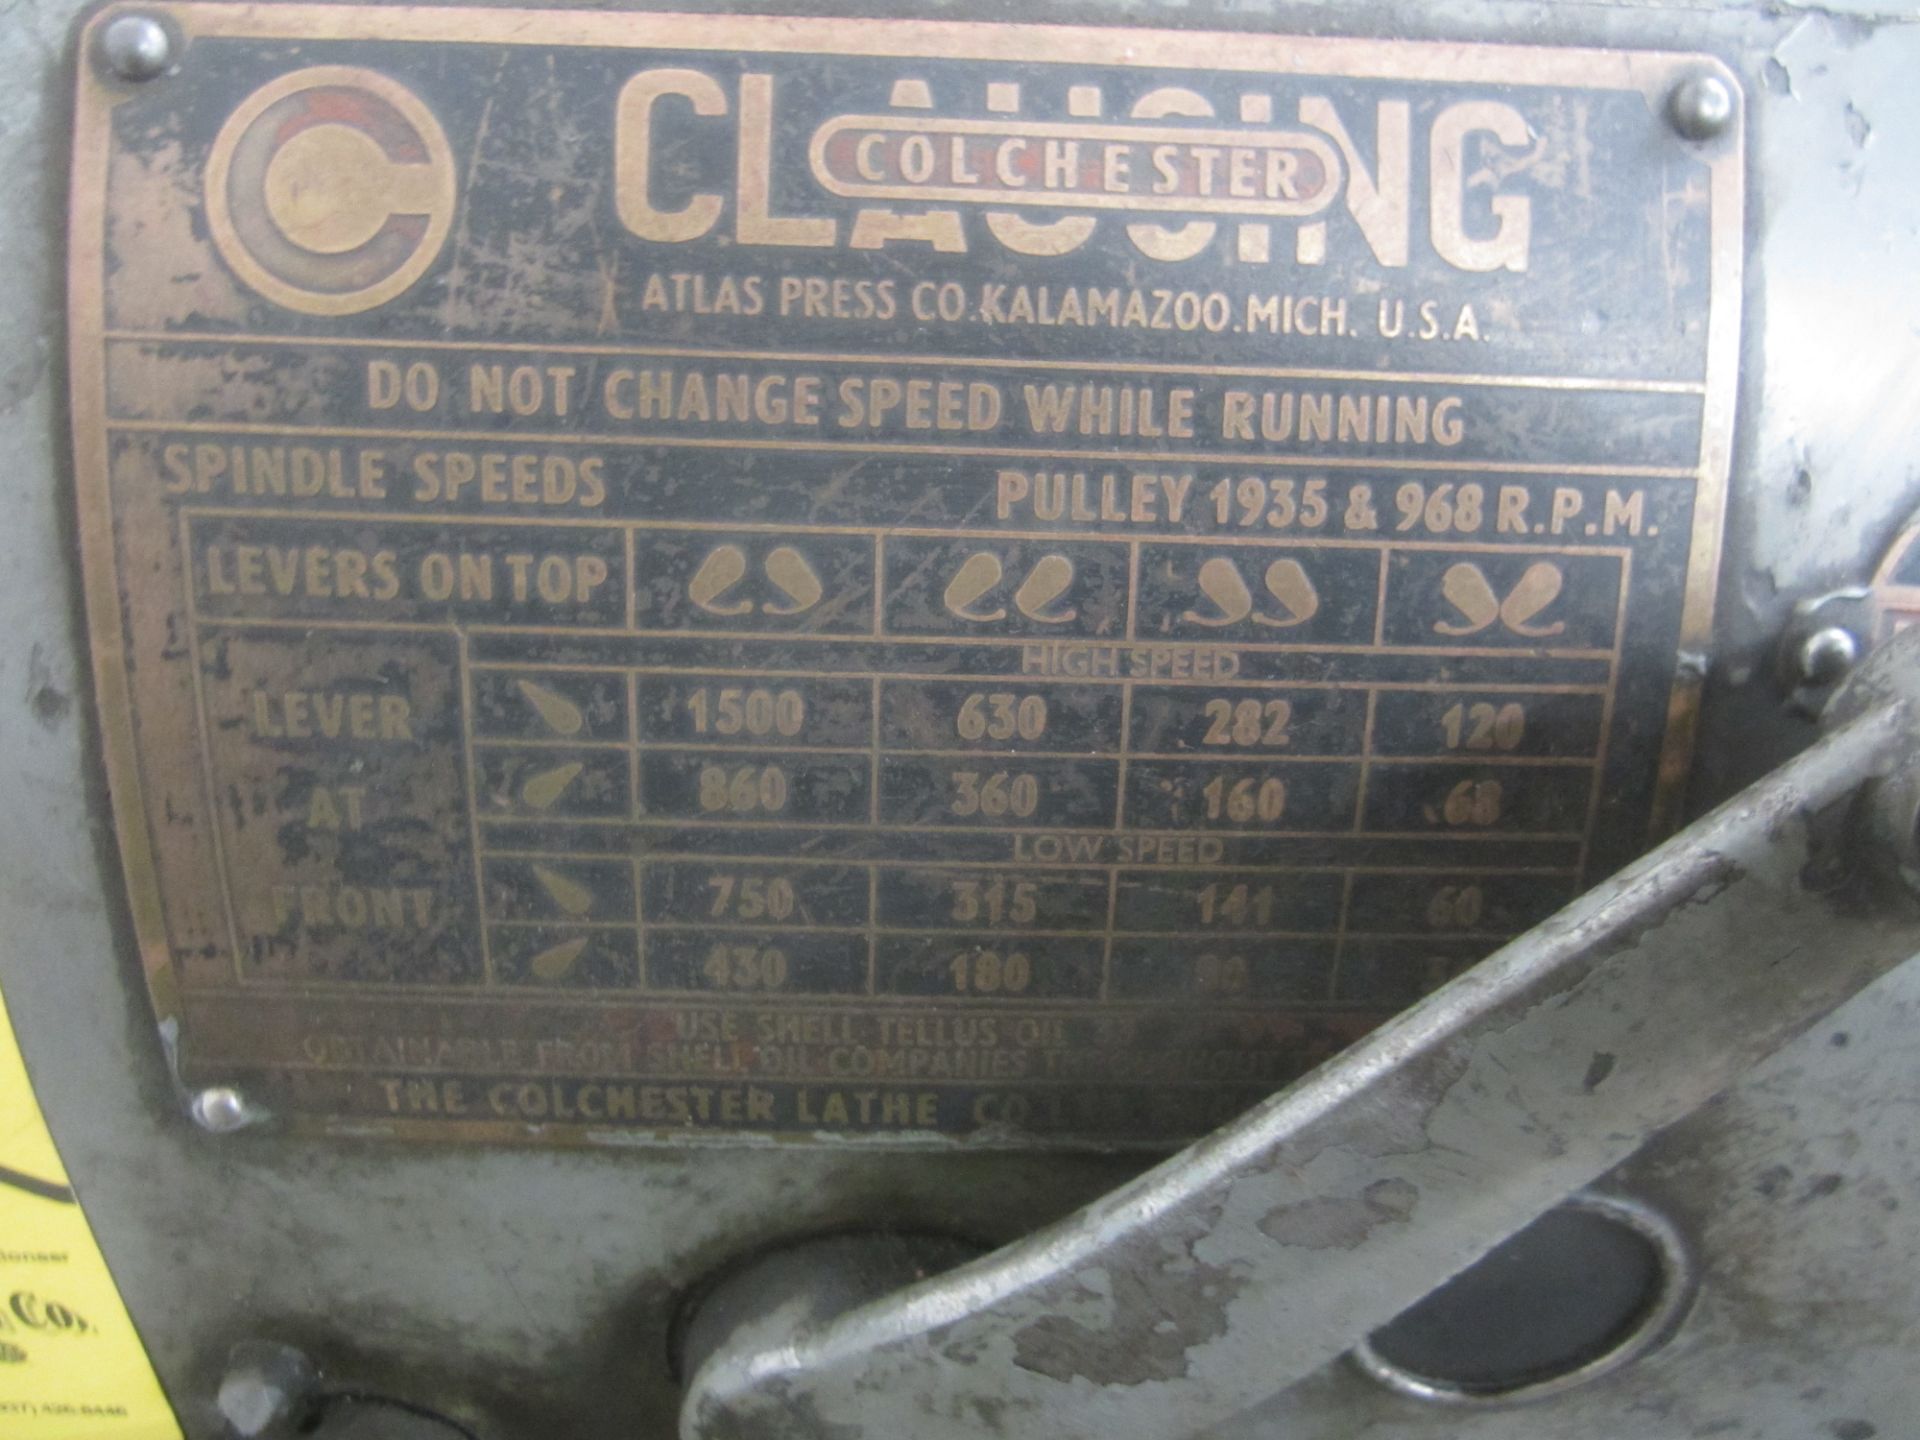 Clausing Colchester 13" X 36" Engine Lathe, s/n 3/34592, 8" 3-Jaw Chuck, 10" 4-Jaw Chuck, Round - Image 5 of 6